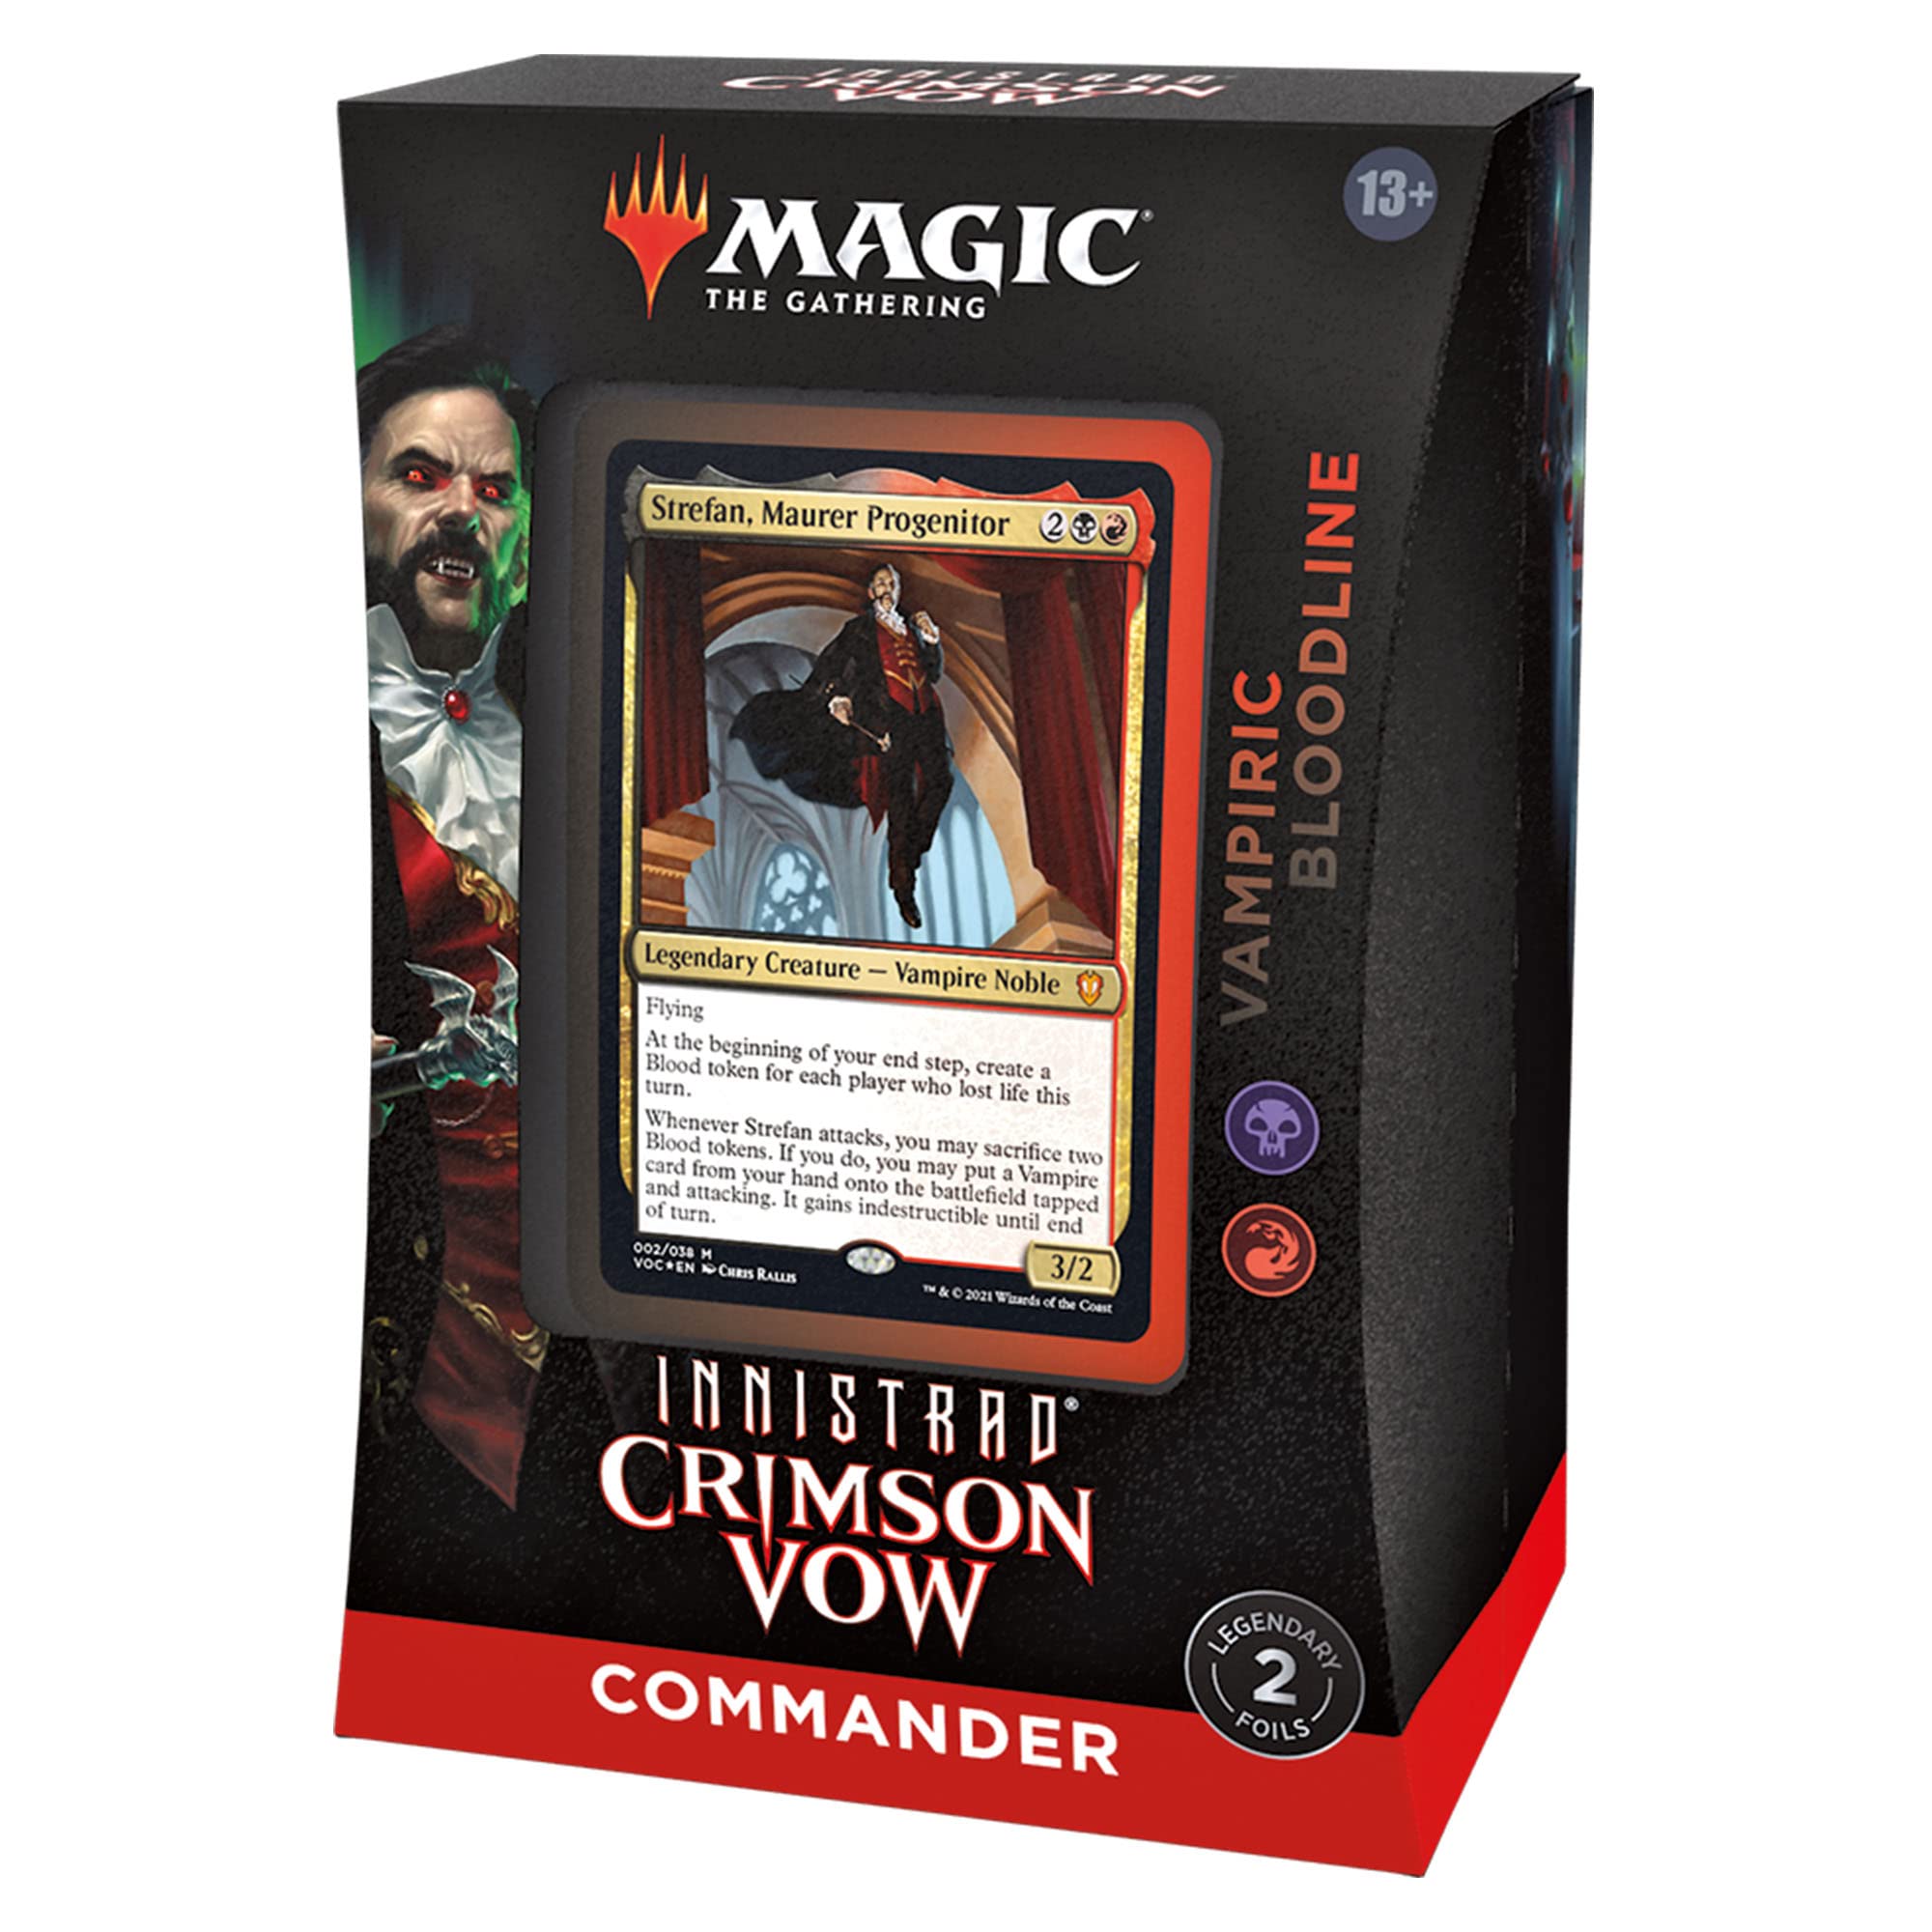 Magic: The Gathering - Innistrad Crimson Vow Commander Deck - Loaded Dice Barry Vale of Glamorgan CF64 3HD